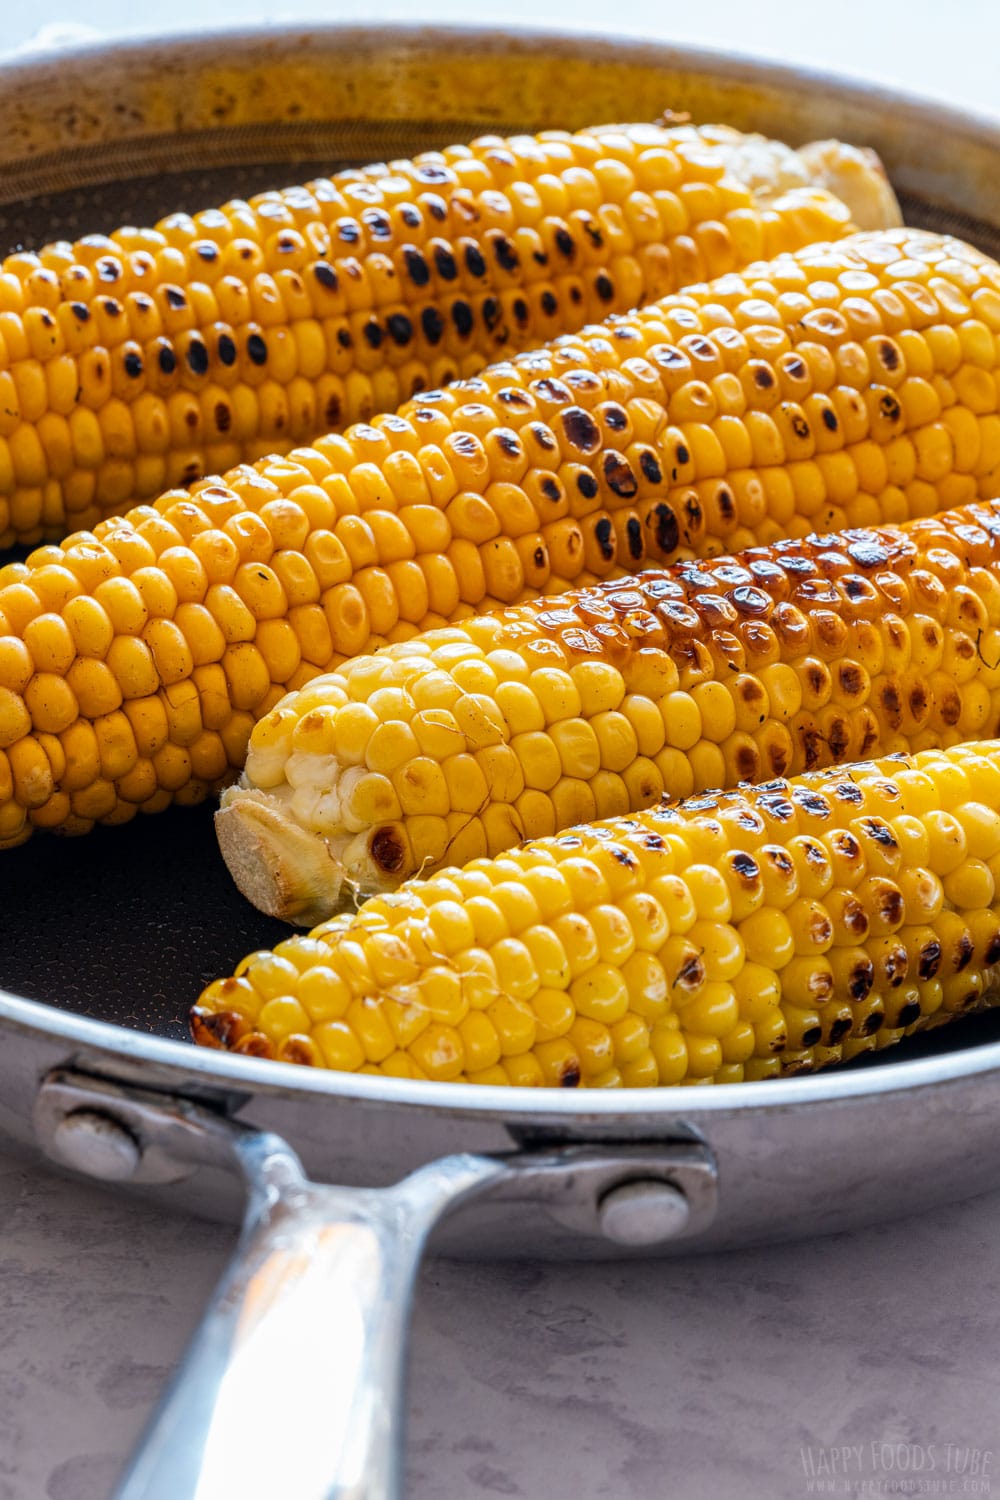 Making grilled corn without grill.